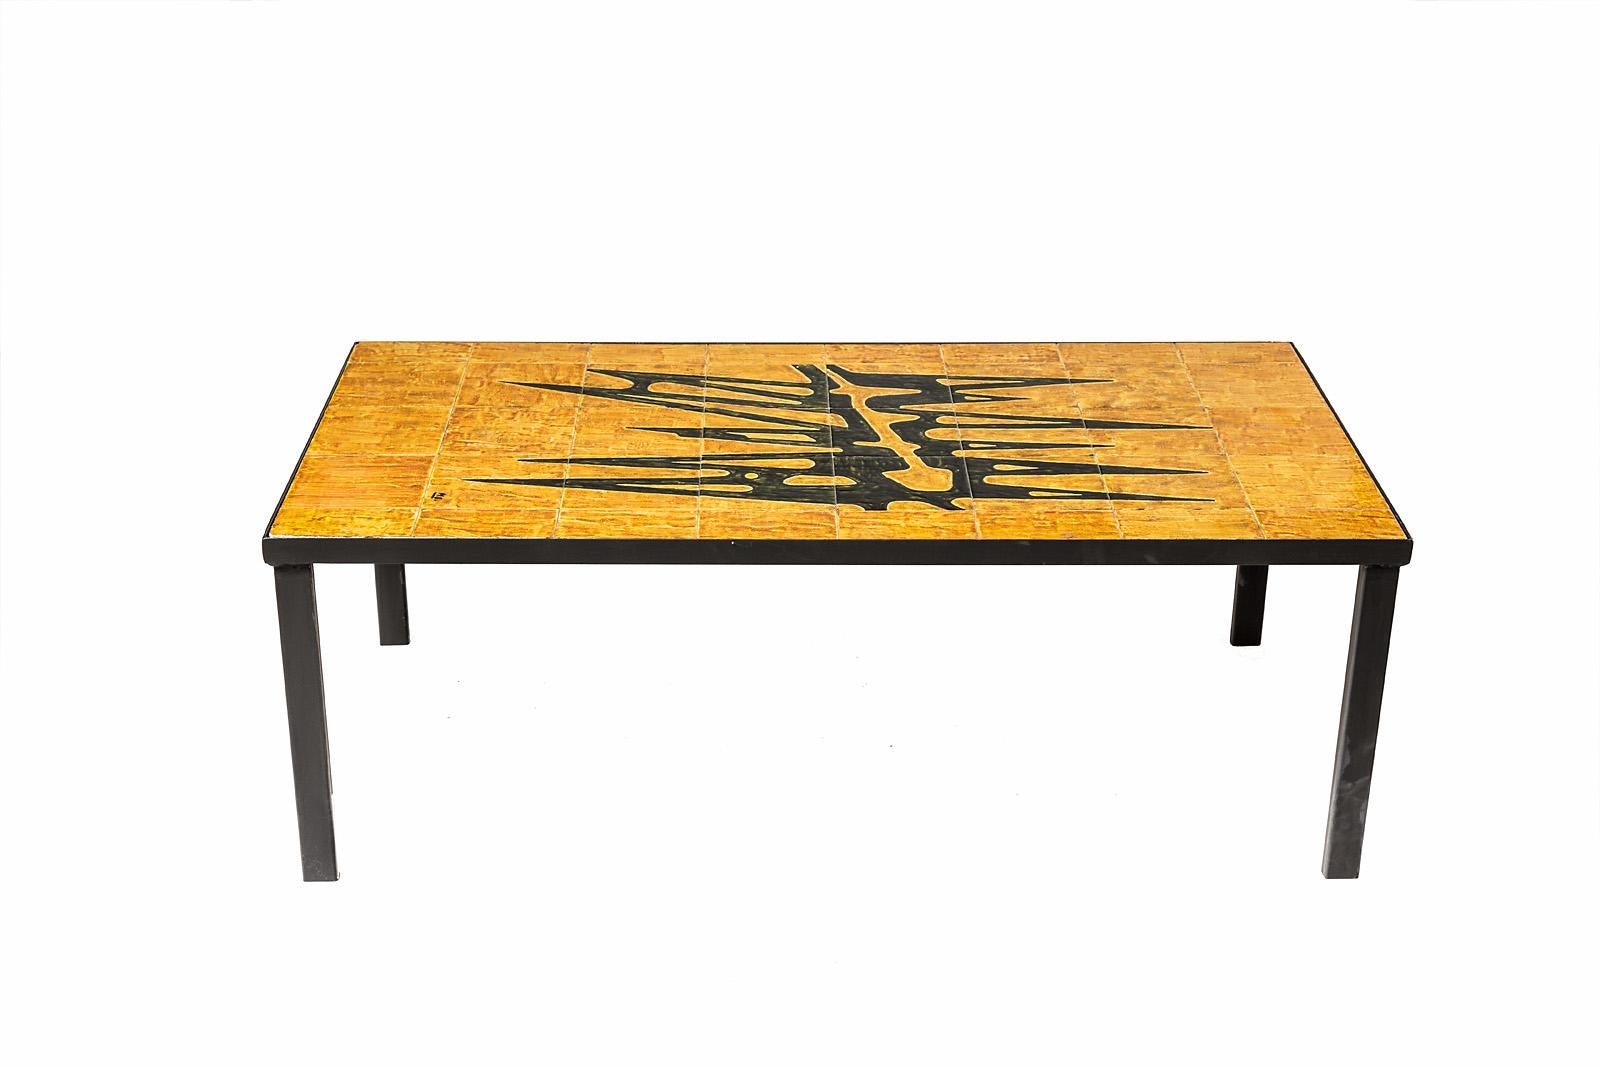 Michalinka Stuart

Elegant large and low mid-20th century ceramic coffee table.

Beautiful black and yellow abstract drawing by the artist.

Signed and realized, circa 1970.

Black metal feet table.

Beautiful ceramic glaze